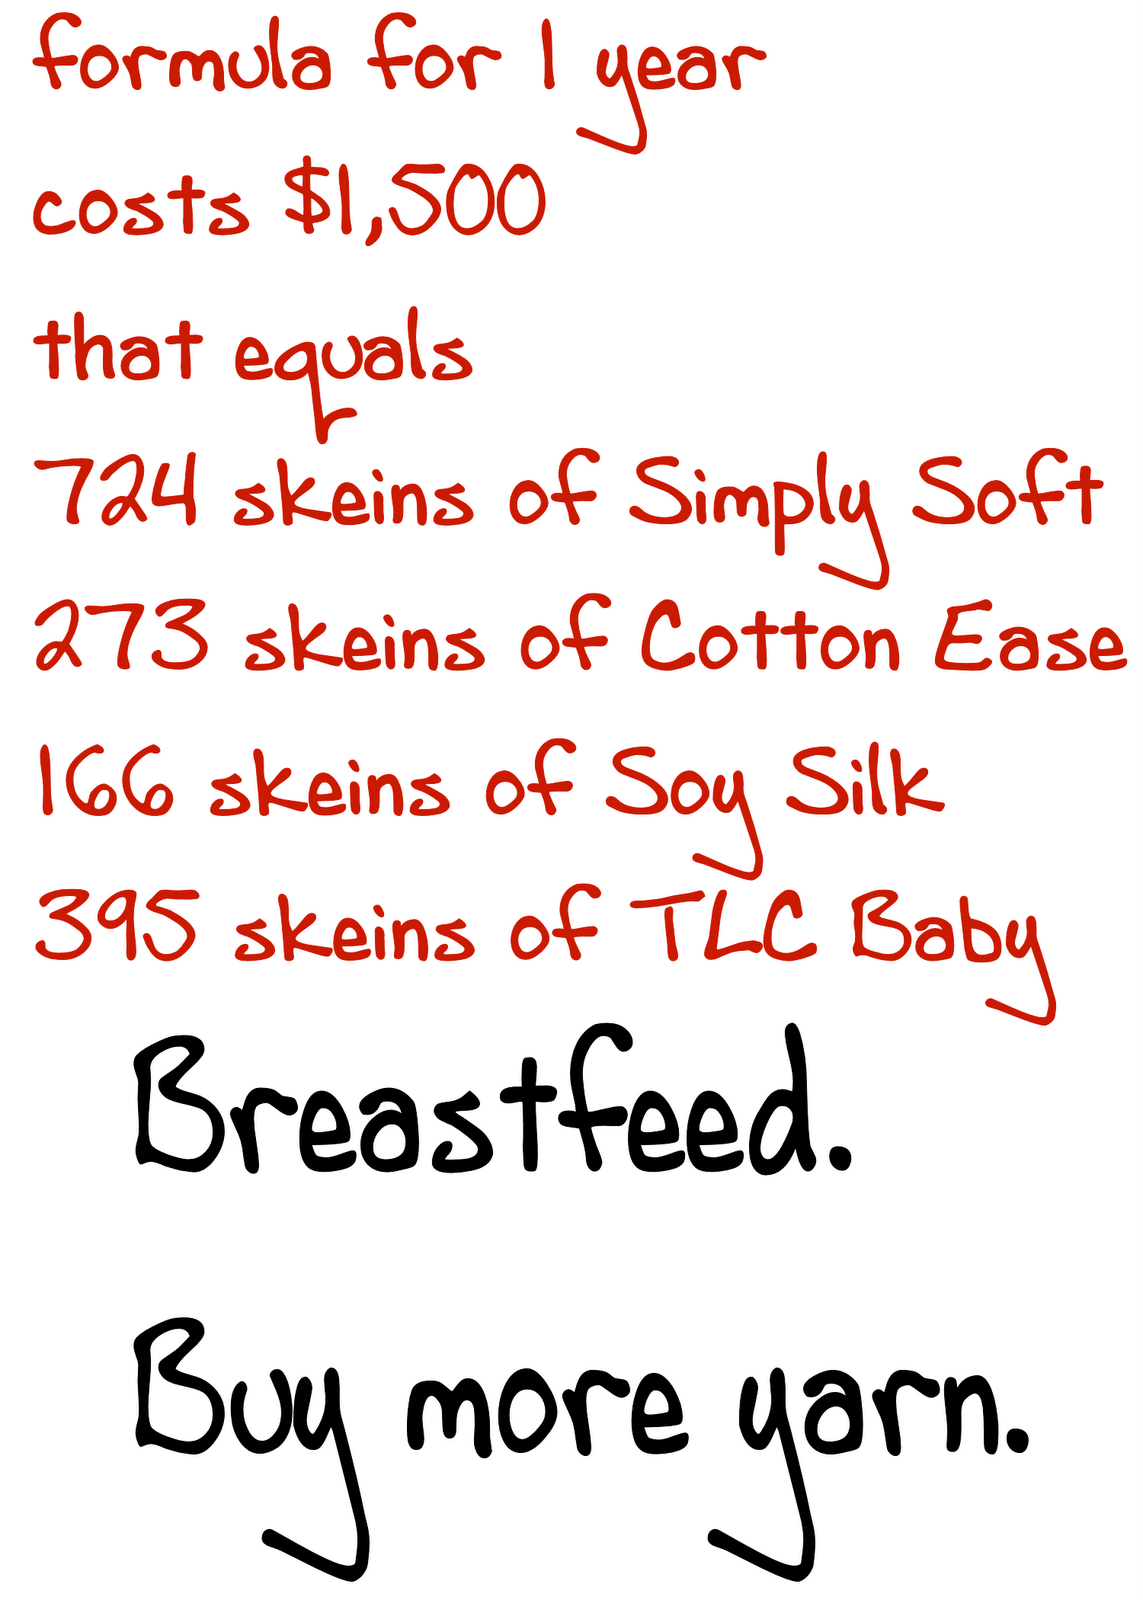 [breastfeeding+equals+more+money+for+yarn.png]